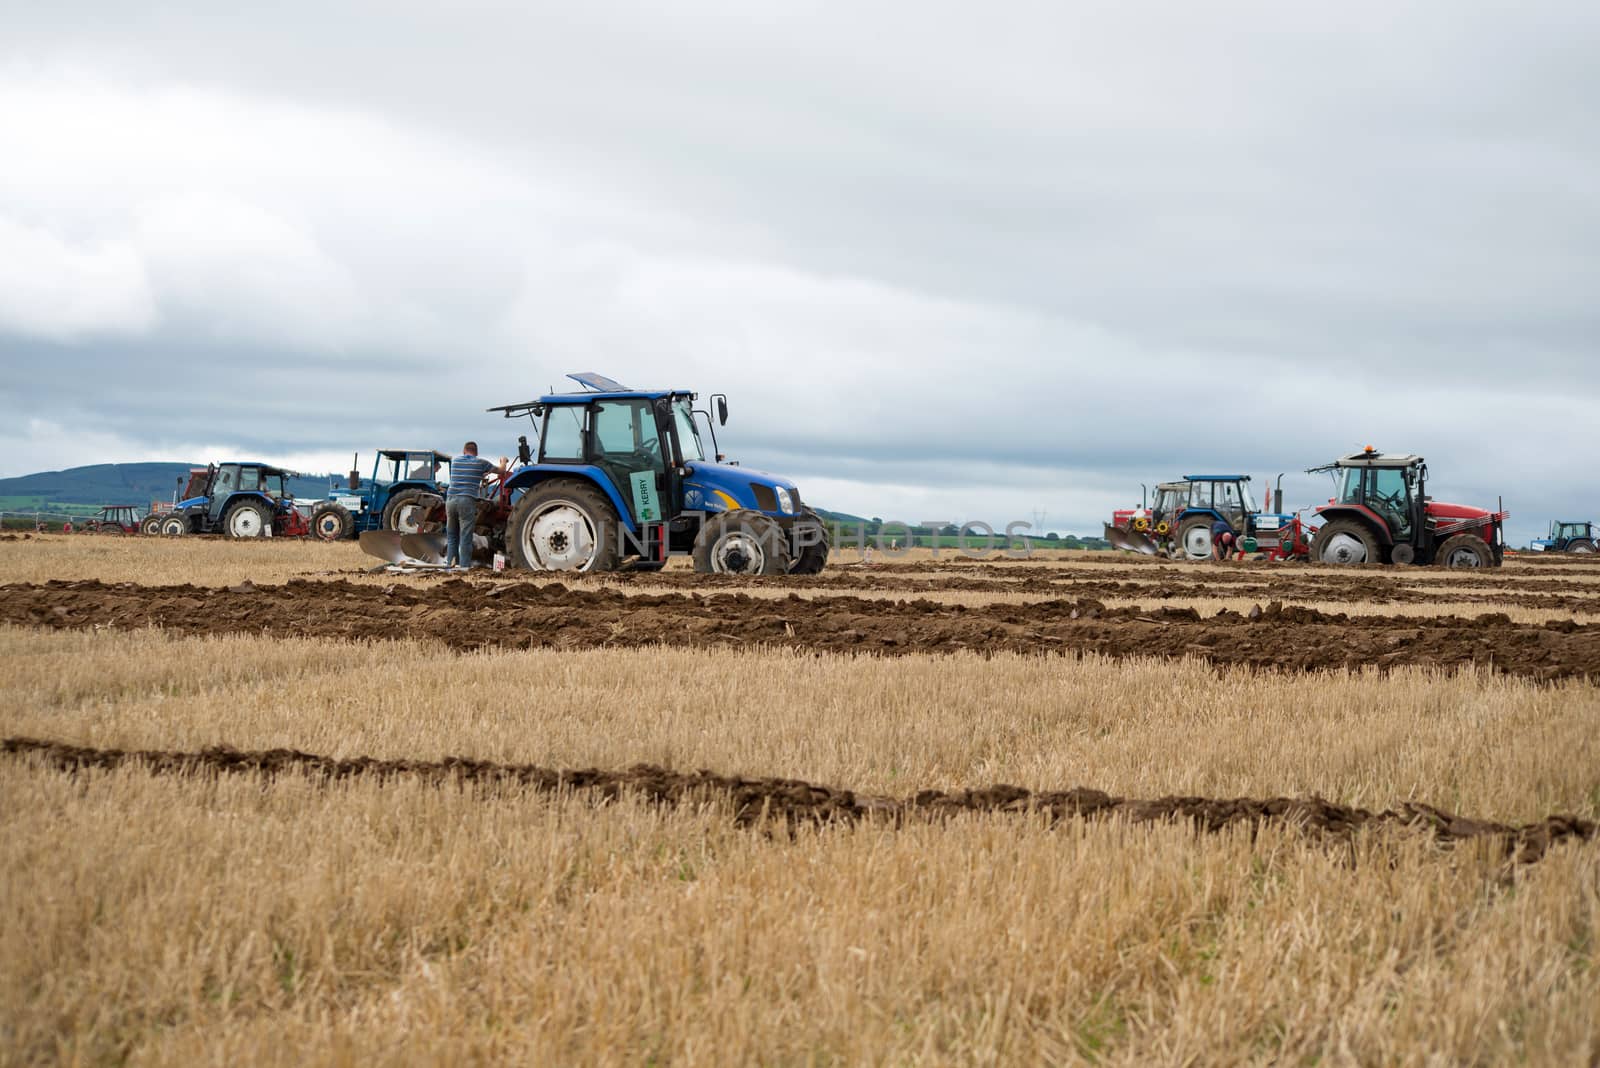 tractors competing in the national ploughing championships by morrbyte